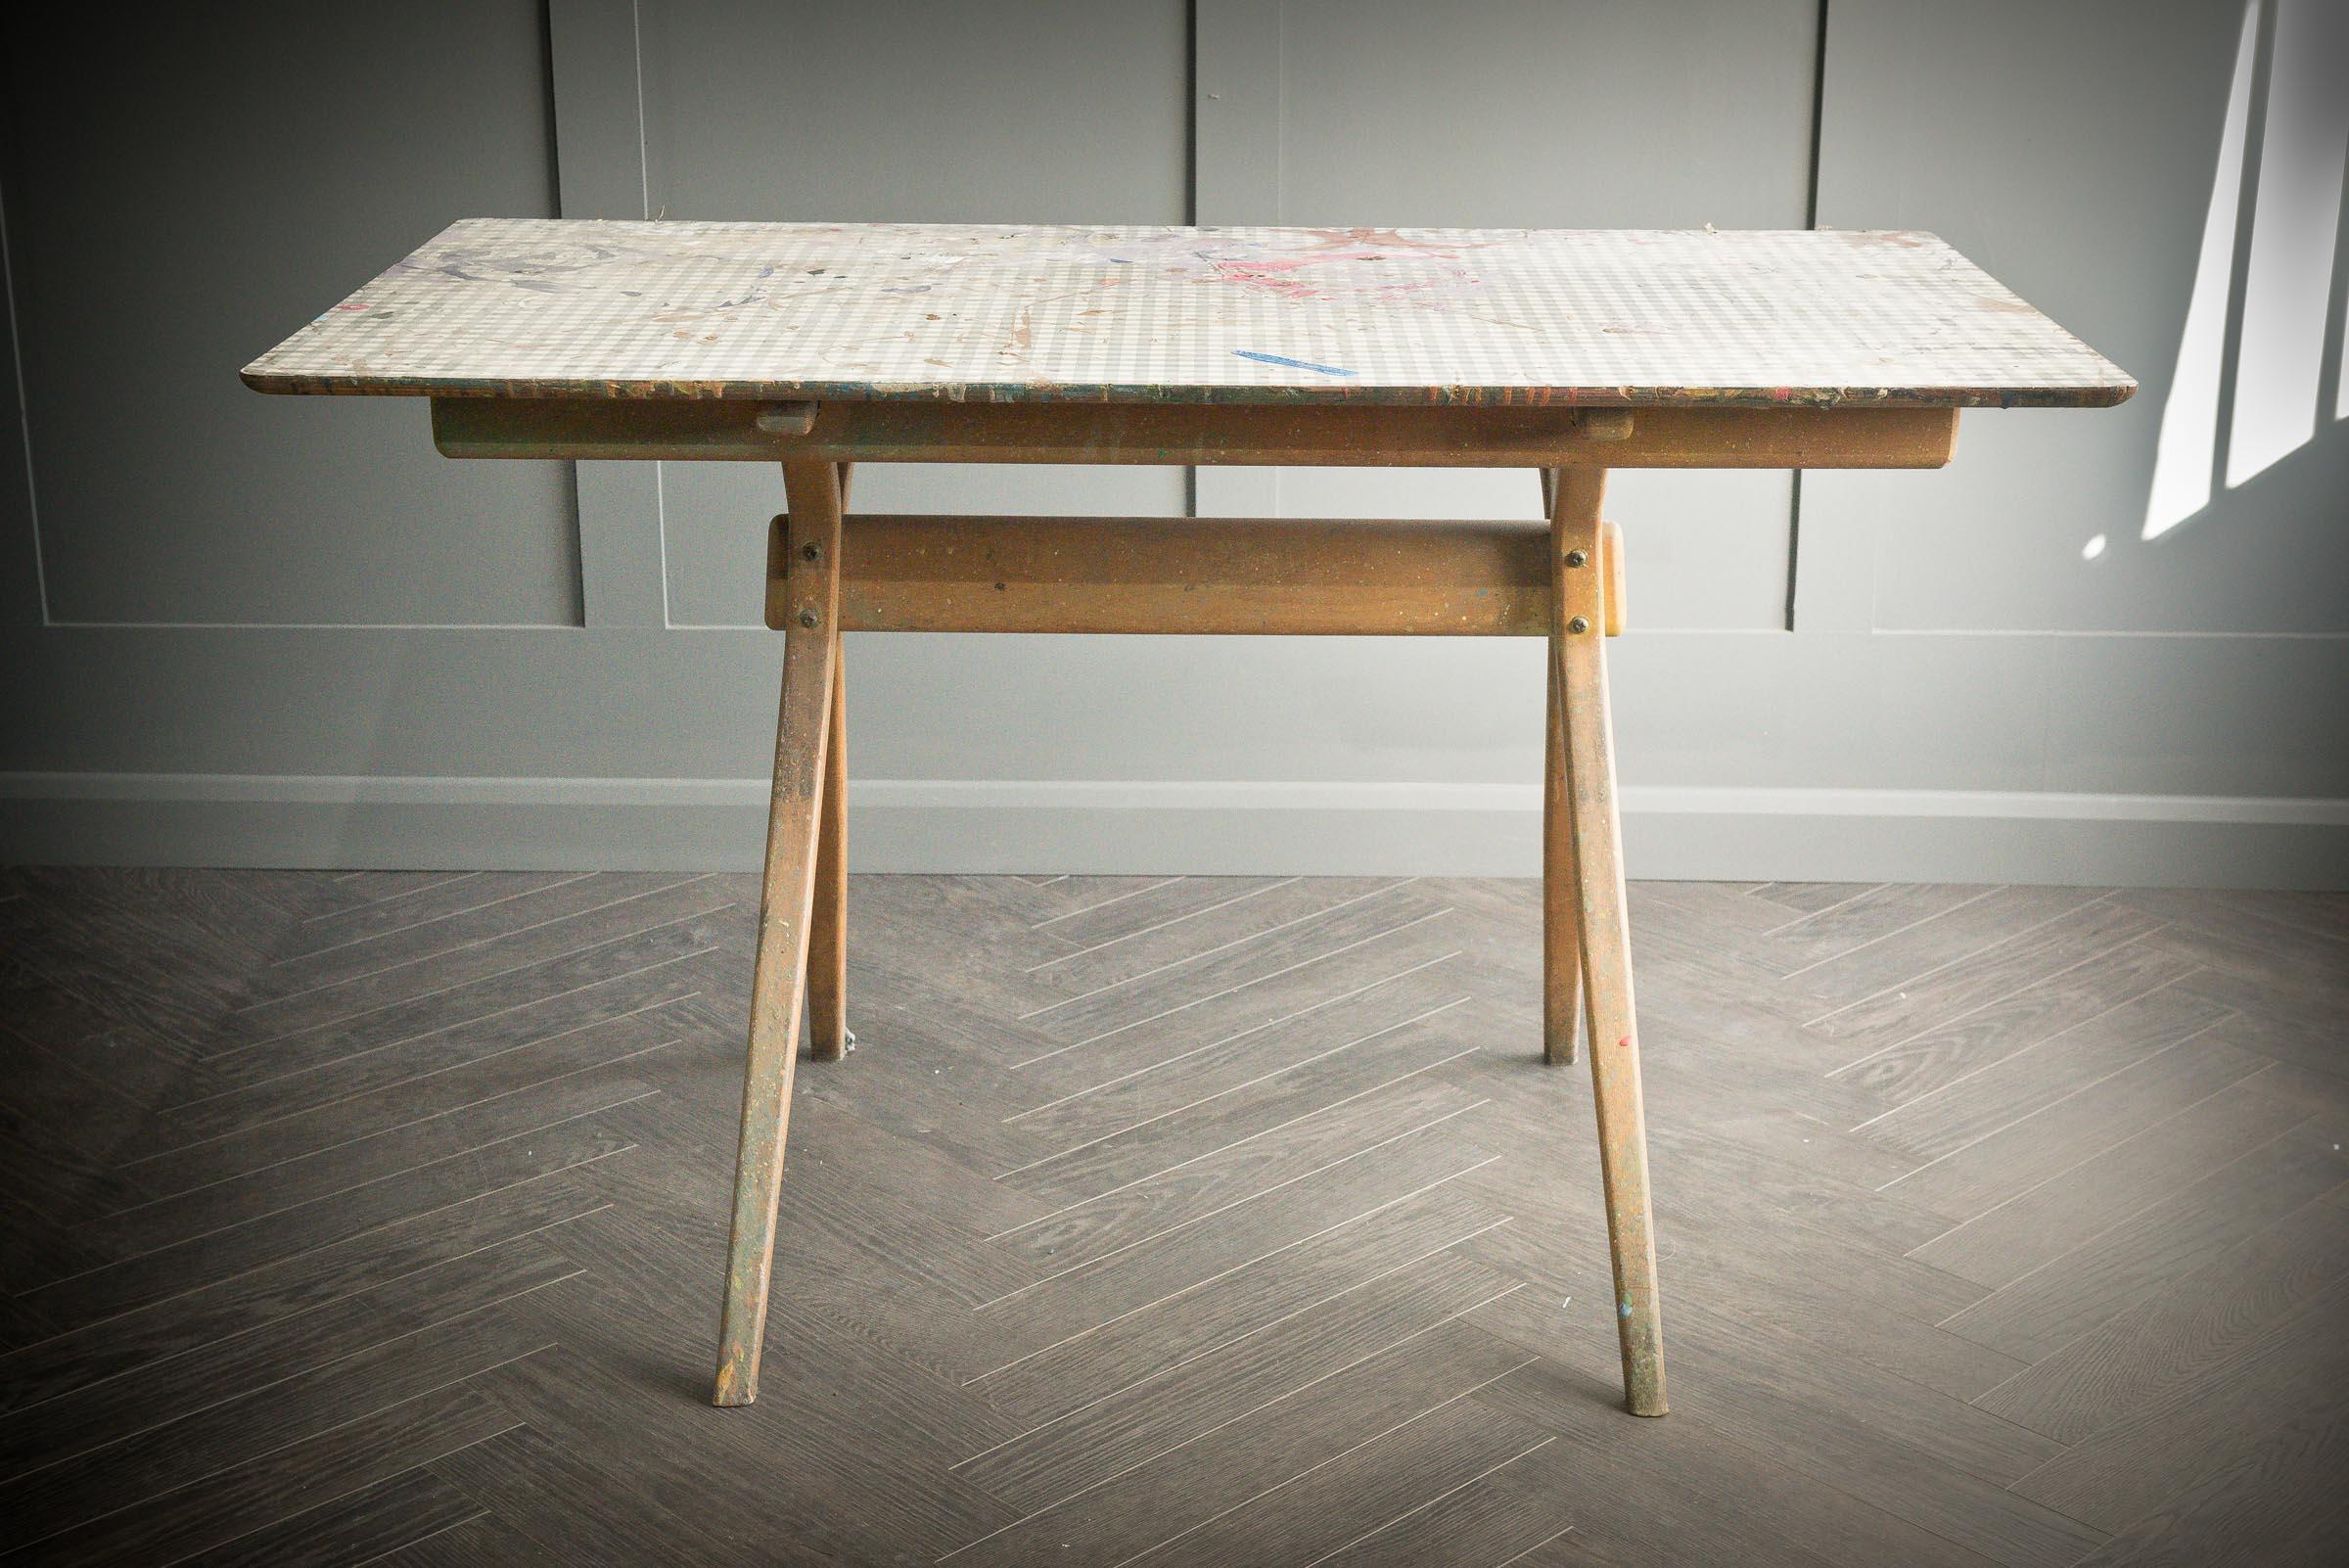 An outstanding table in true Scandinavian style - Previously used in a theater art department which shows from the paint stains to the table top. The beautiful bowed legs give the appearance of a cross frame but are four separate parts connect by a